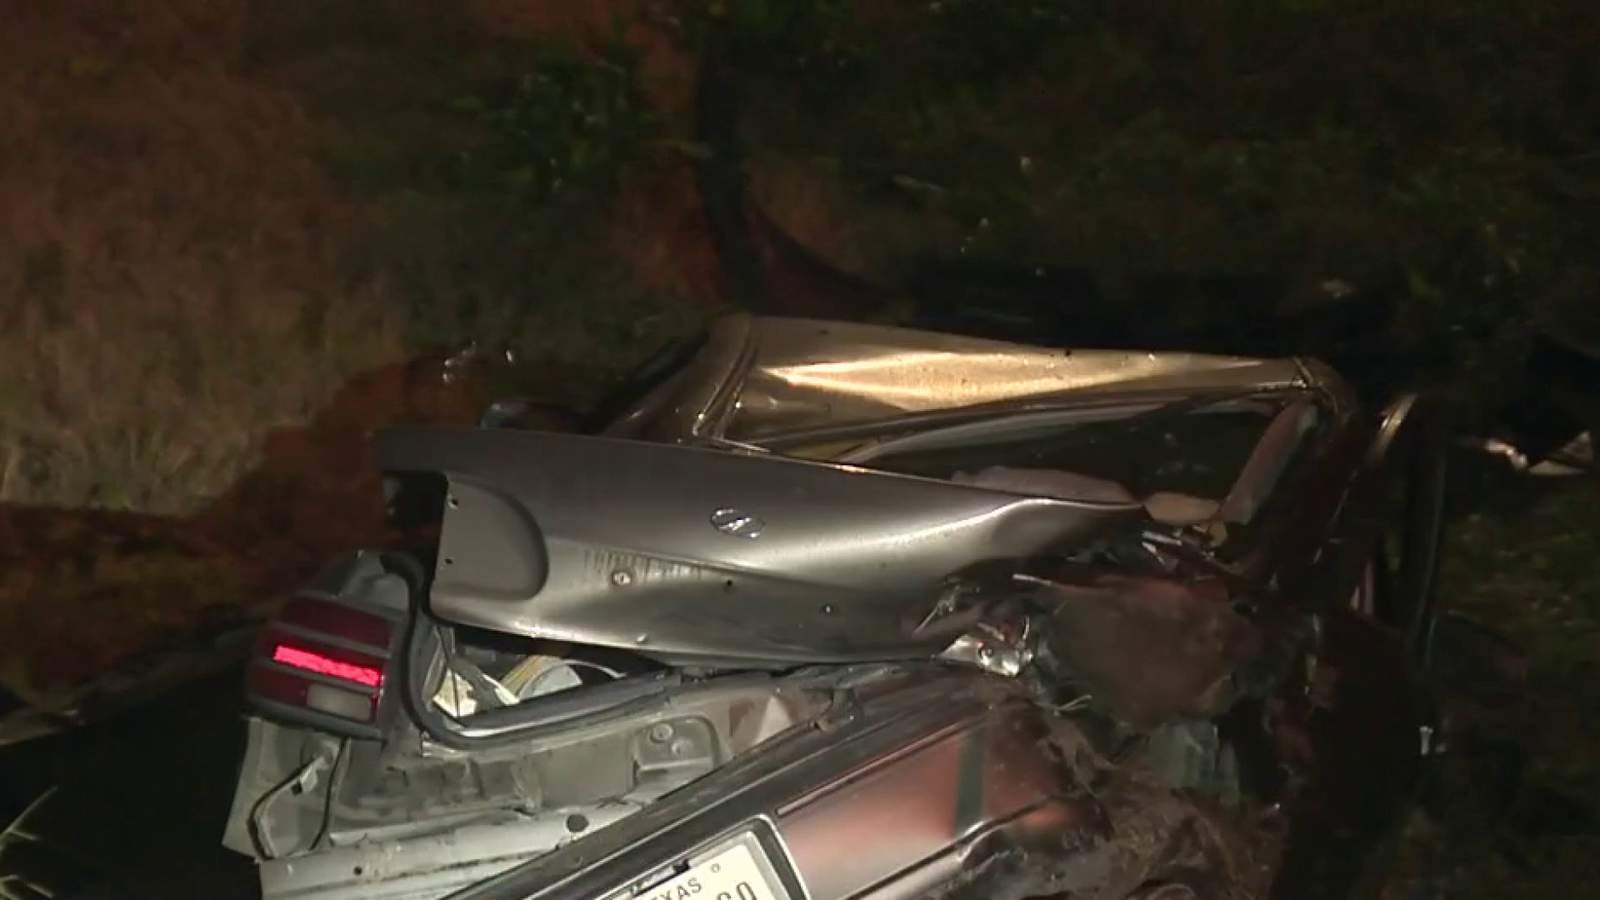 Driver critically injured after crashing into guardrail, going airborne and hitting embankment, police say